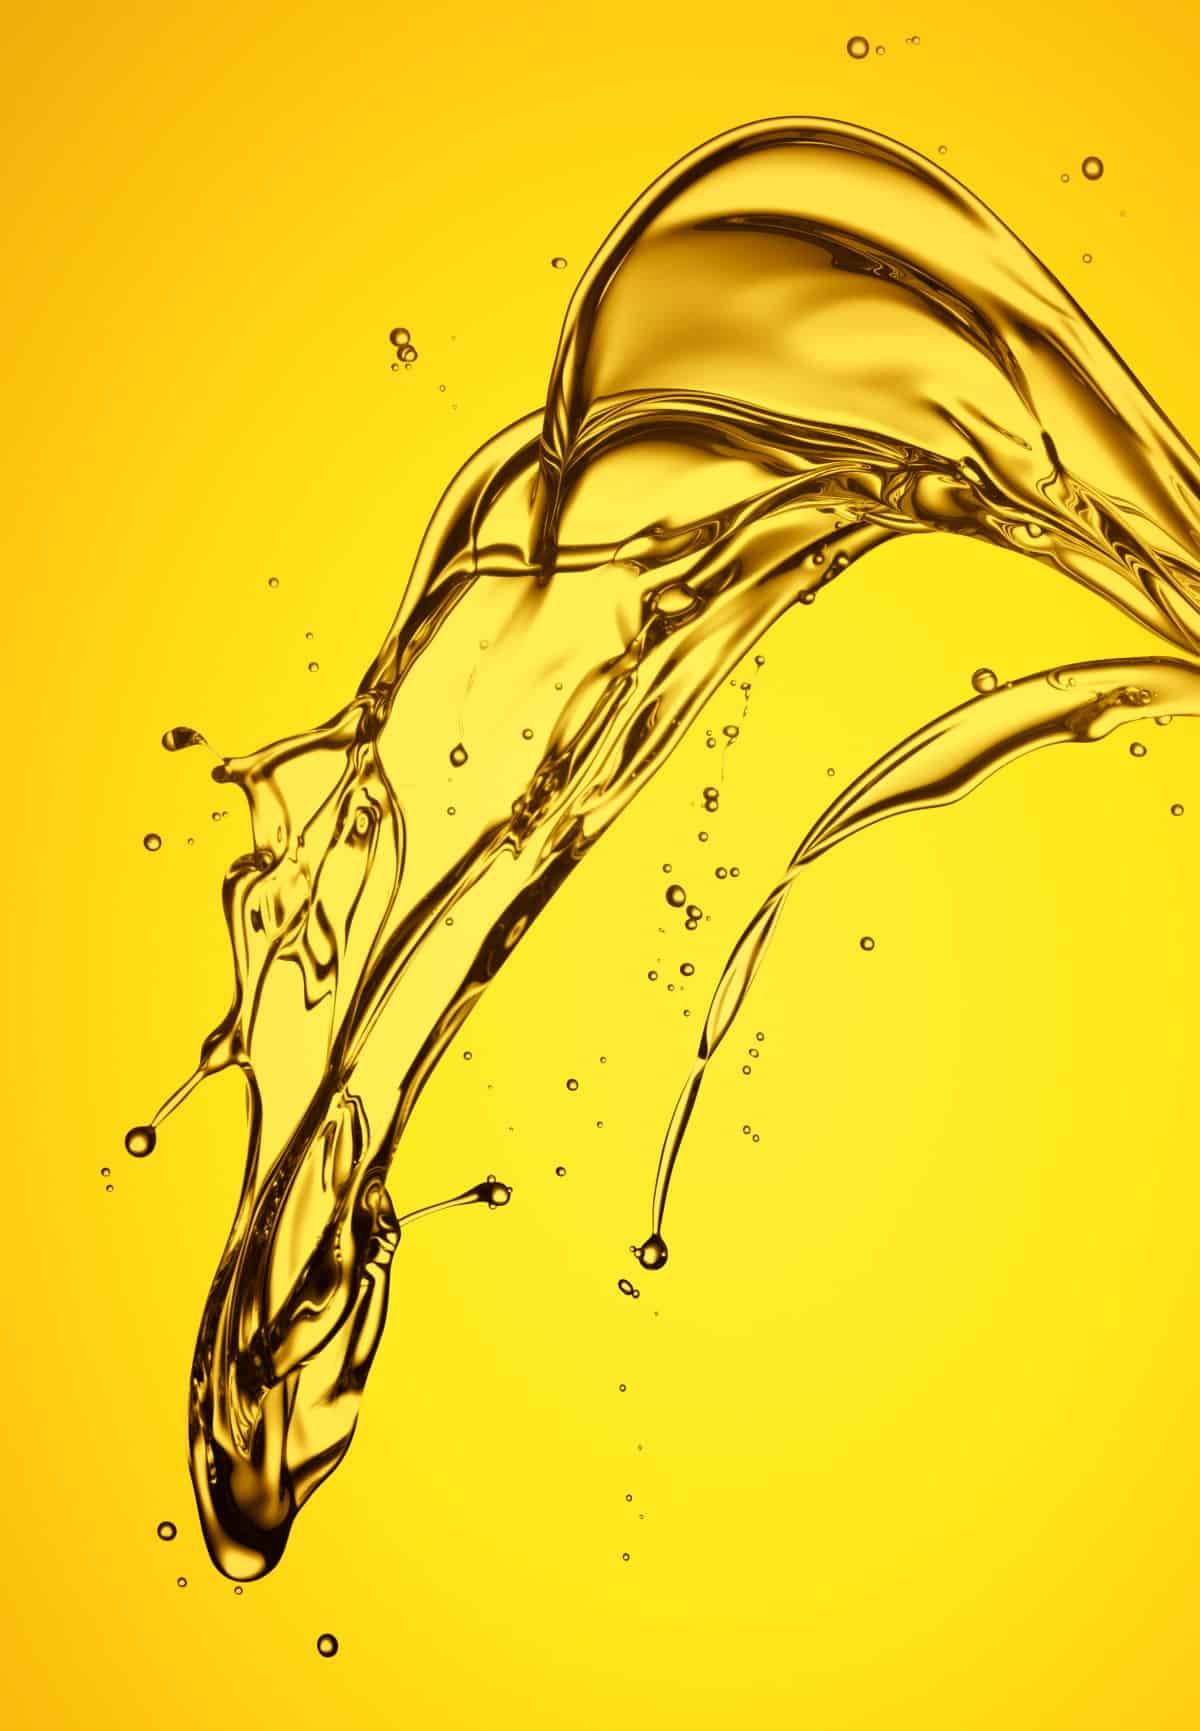 gold color oil splashing against yellow background